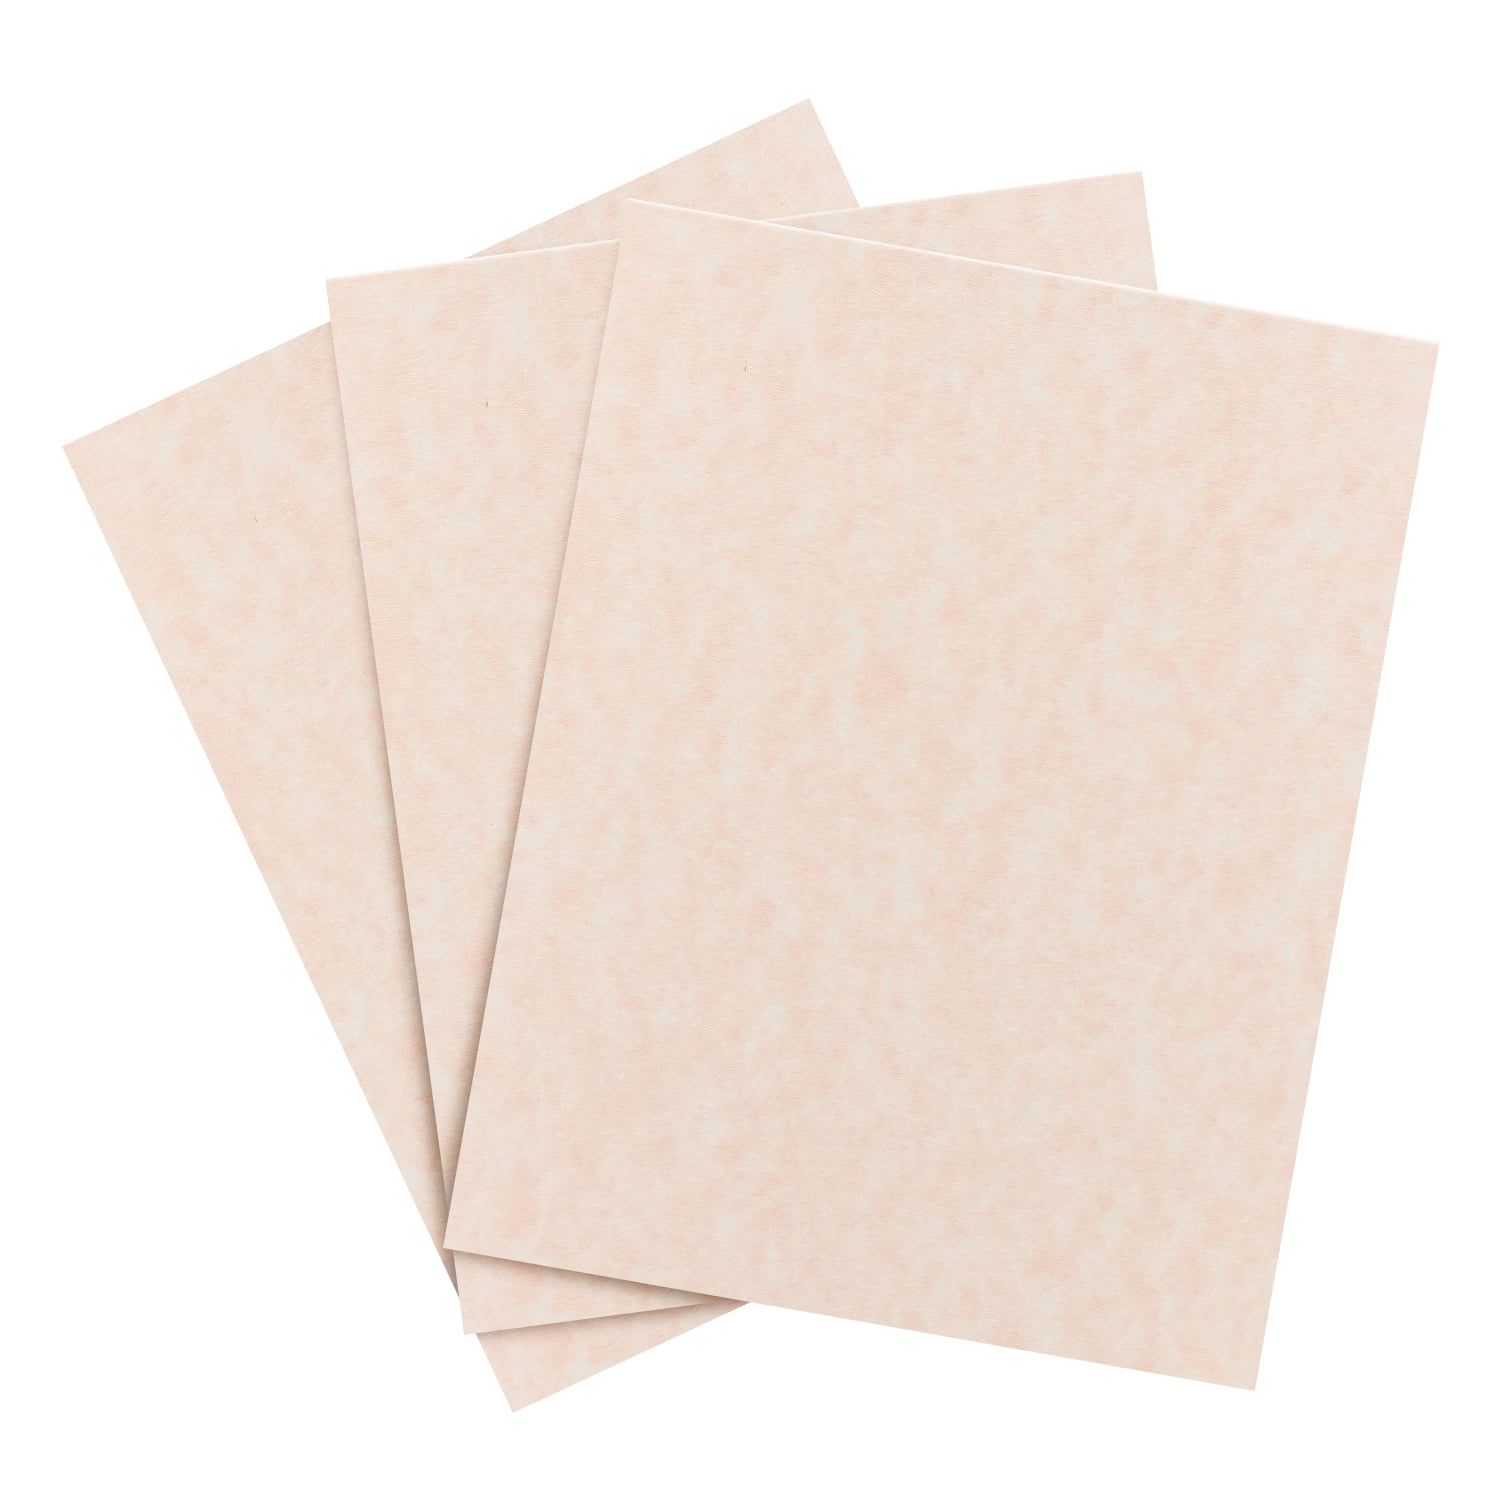 Salmon Parchment Paper – Great for Certificates, Menus and Wedding  Invitations, 24lb Bond / 60lb Text / 90GSM, 8.5 x 11 (Letter Size)  Paper for Writing, Copy, Printing